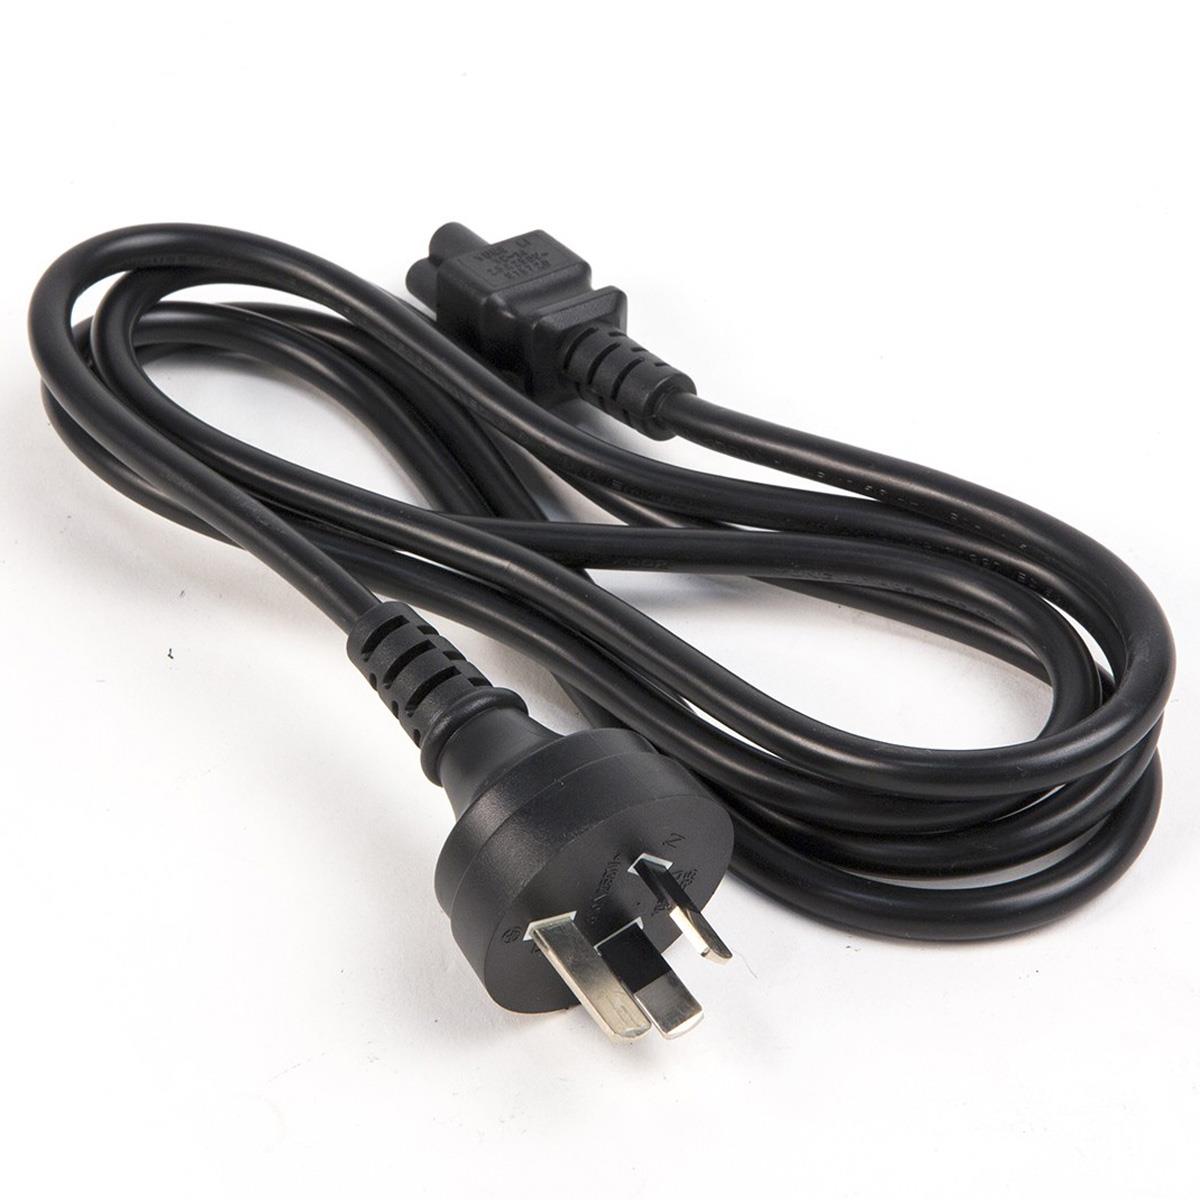 Image of Kessler Australia / New Zealand Region Wall Cord for Oracle AC Wall Adapter